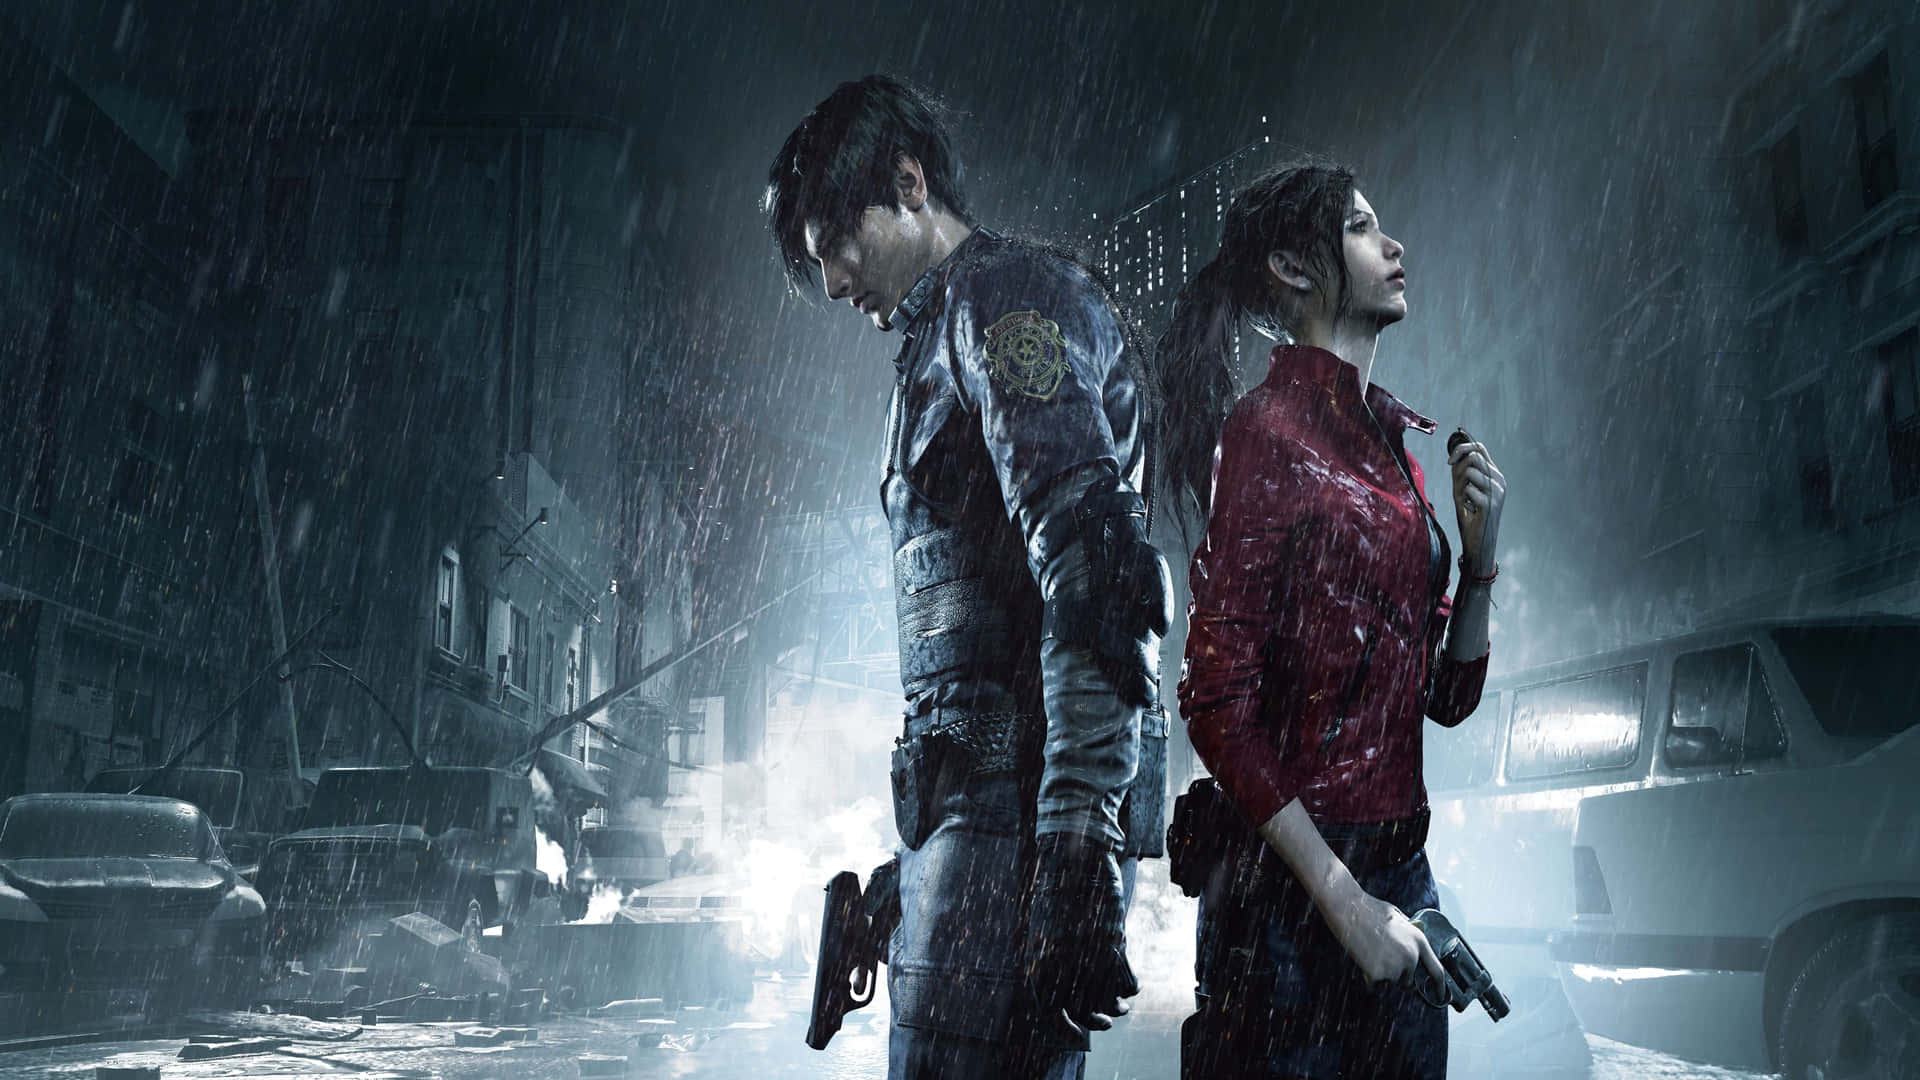 1920x1080 Resident Evil 2 Background Leon And Claire In The Rain Background